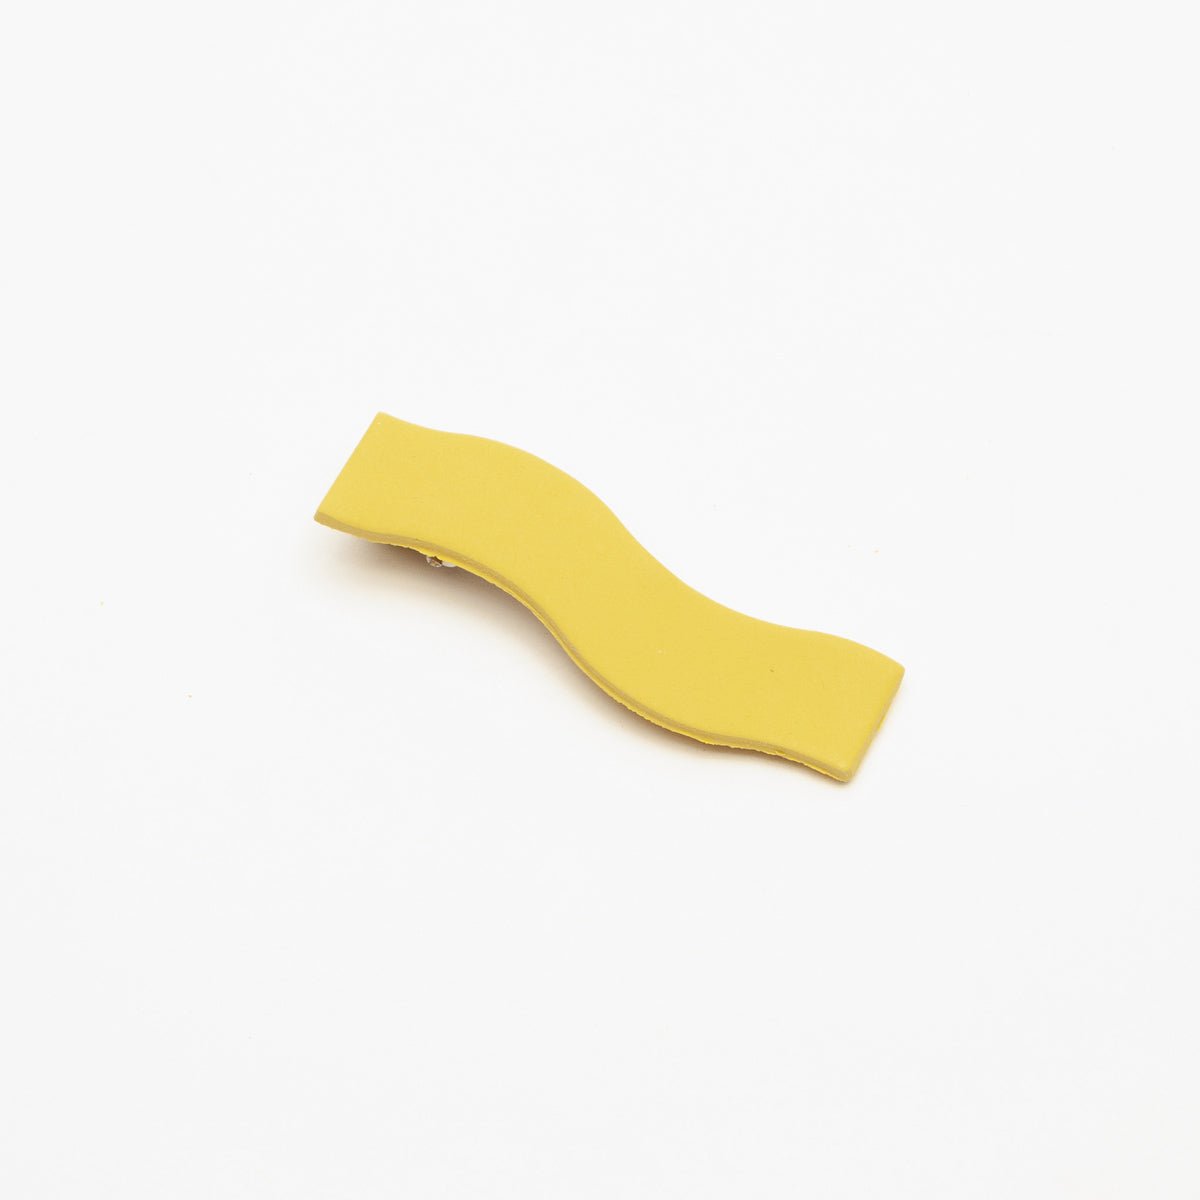 Wave shaped hair clip in "Araw," a. yellow shade. Made in Los Angeles by Hey Moon Designs.